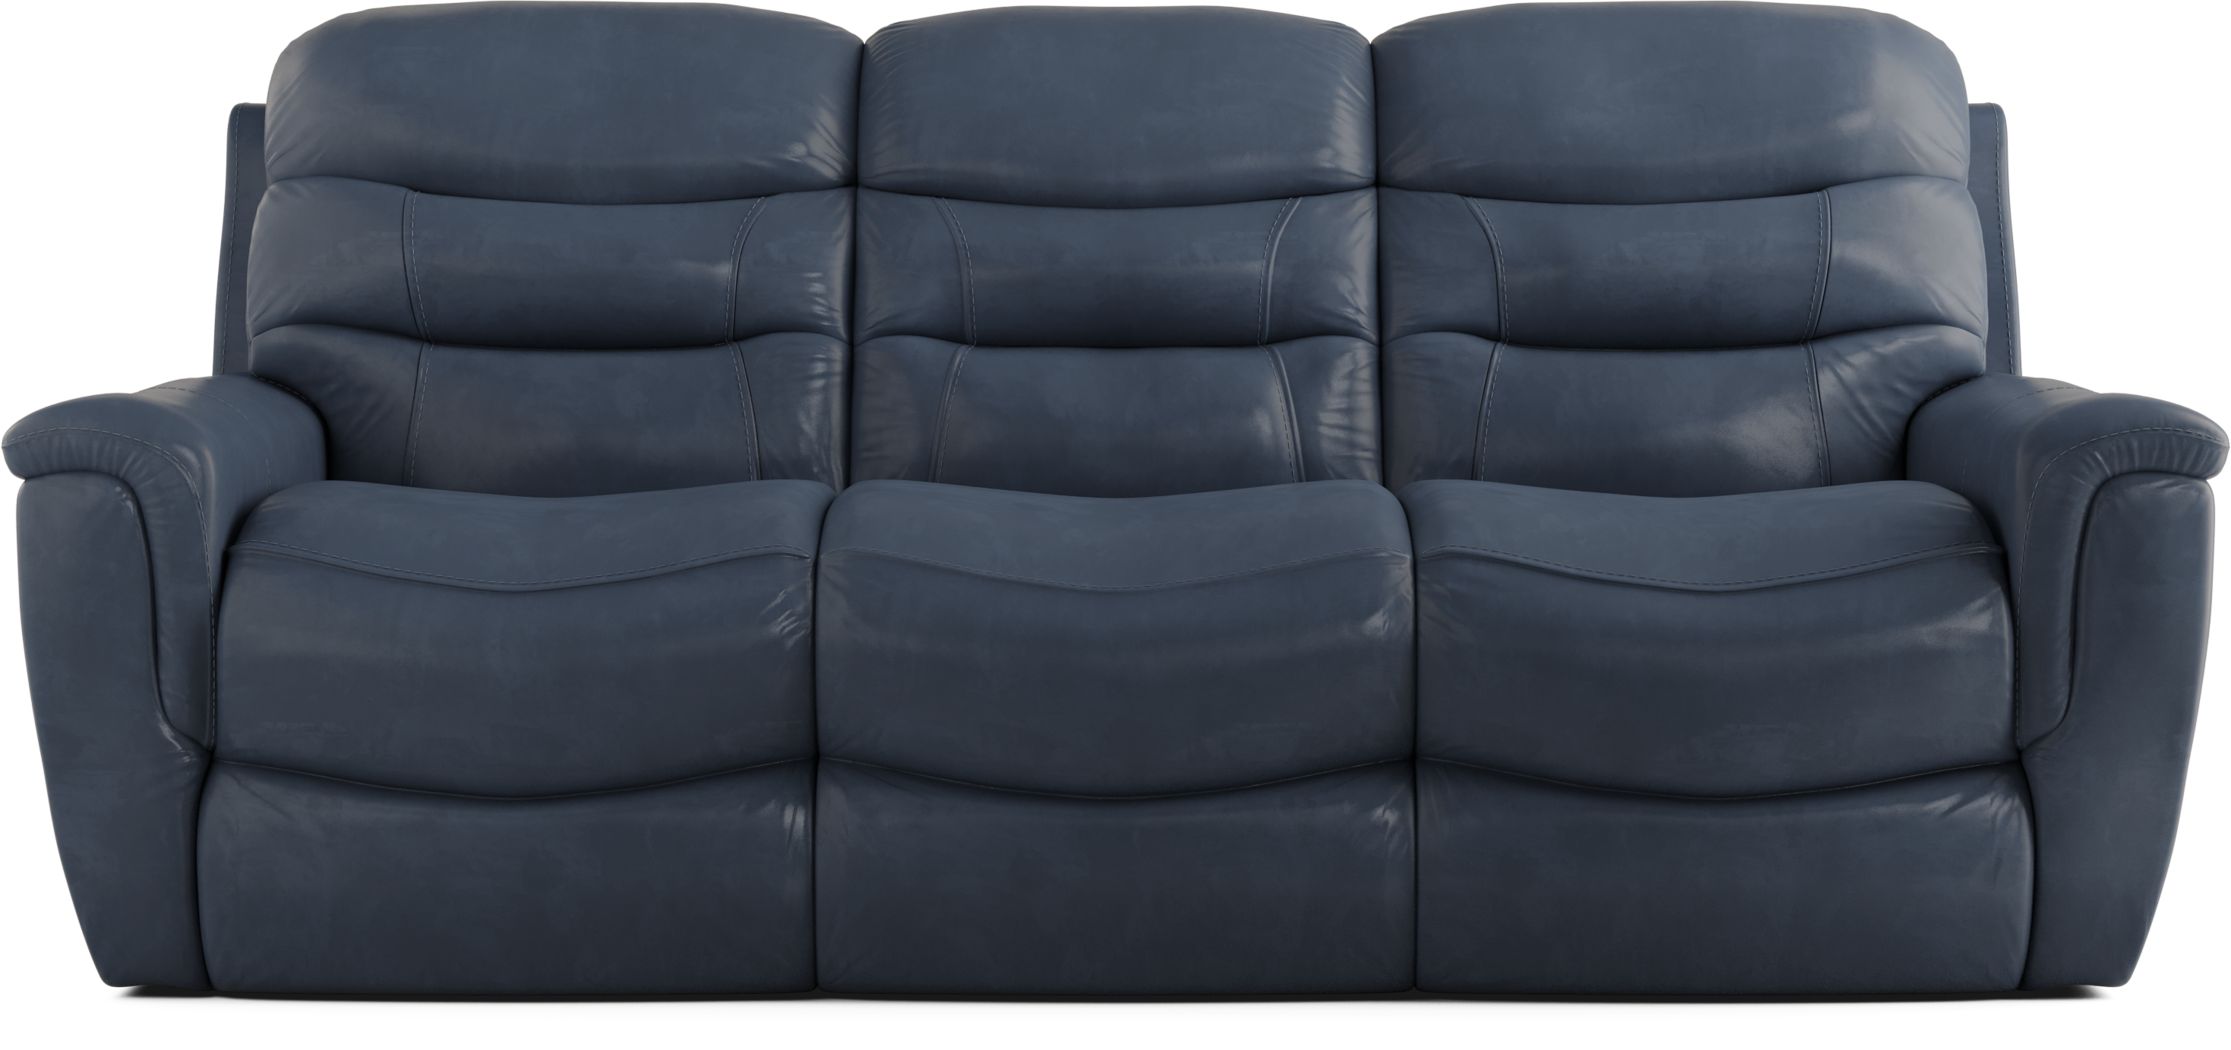 Sabella Navy Leather Reclining Sofa Rooms To Go